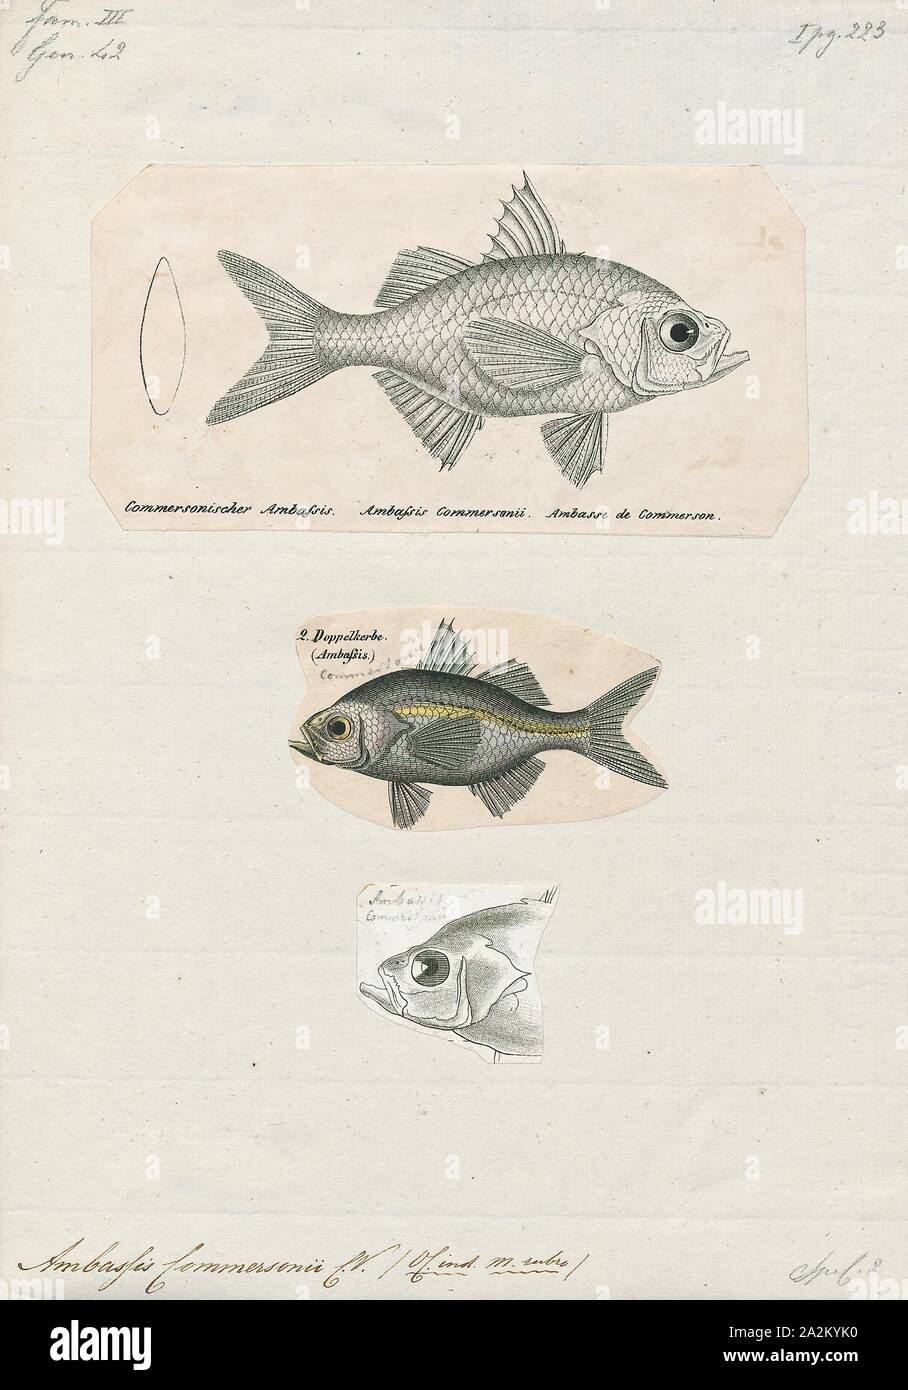 Ambassis commersonii, Print, Ambassis is a genus of fish in the family Ambassidae, the Asiatic glassfishes. They are found widely in the Indo-Pacific region, with species in fresh, brackish and coastal marine waters Stock Photo